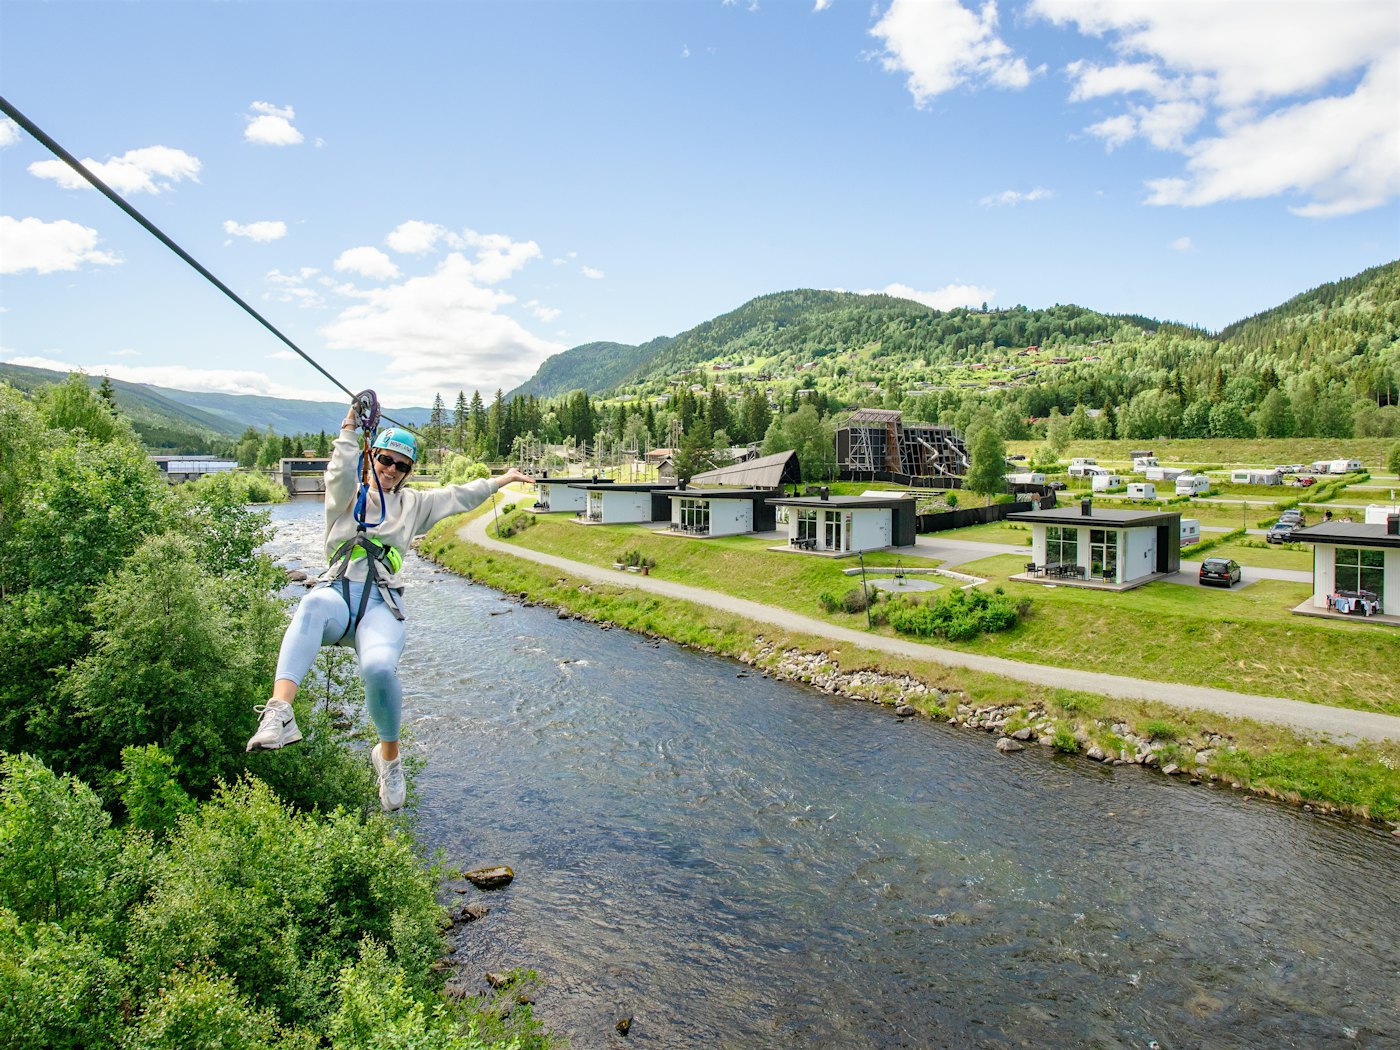 Lady in a zipline over the river, with the cabins and campsite in the background. Photo